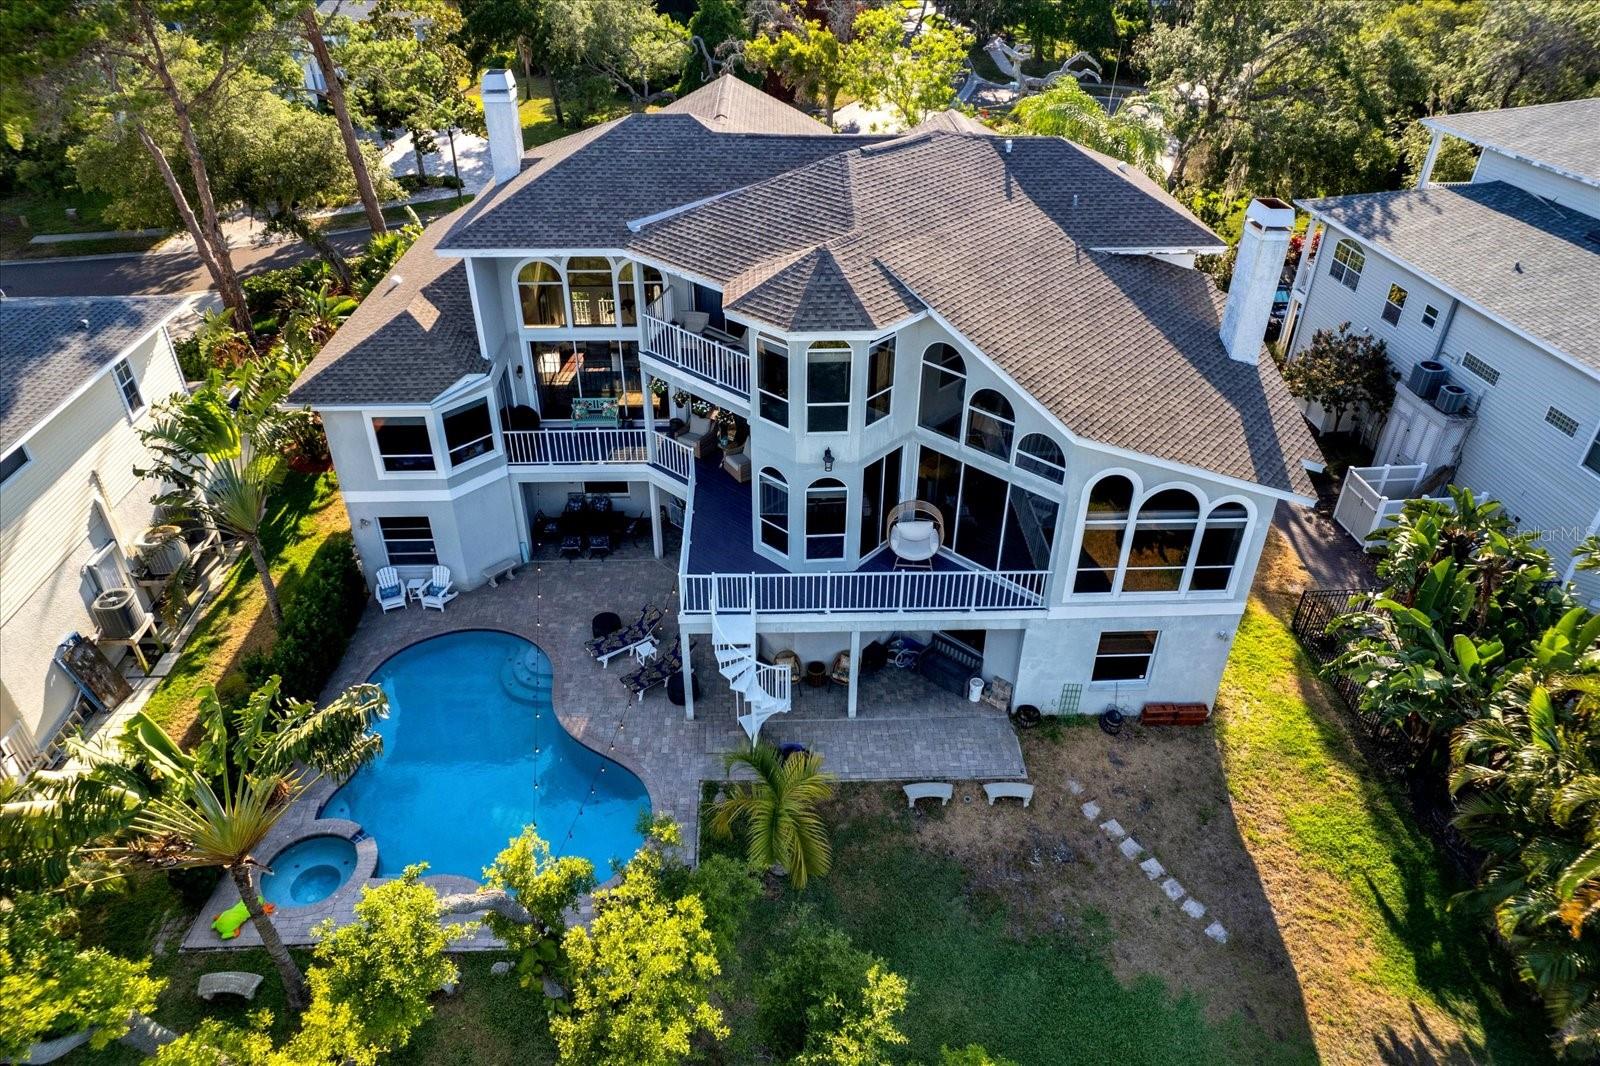 A grand beauty perfectly situated on Sutherland Bayou in the quaint city of Crystal Beach